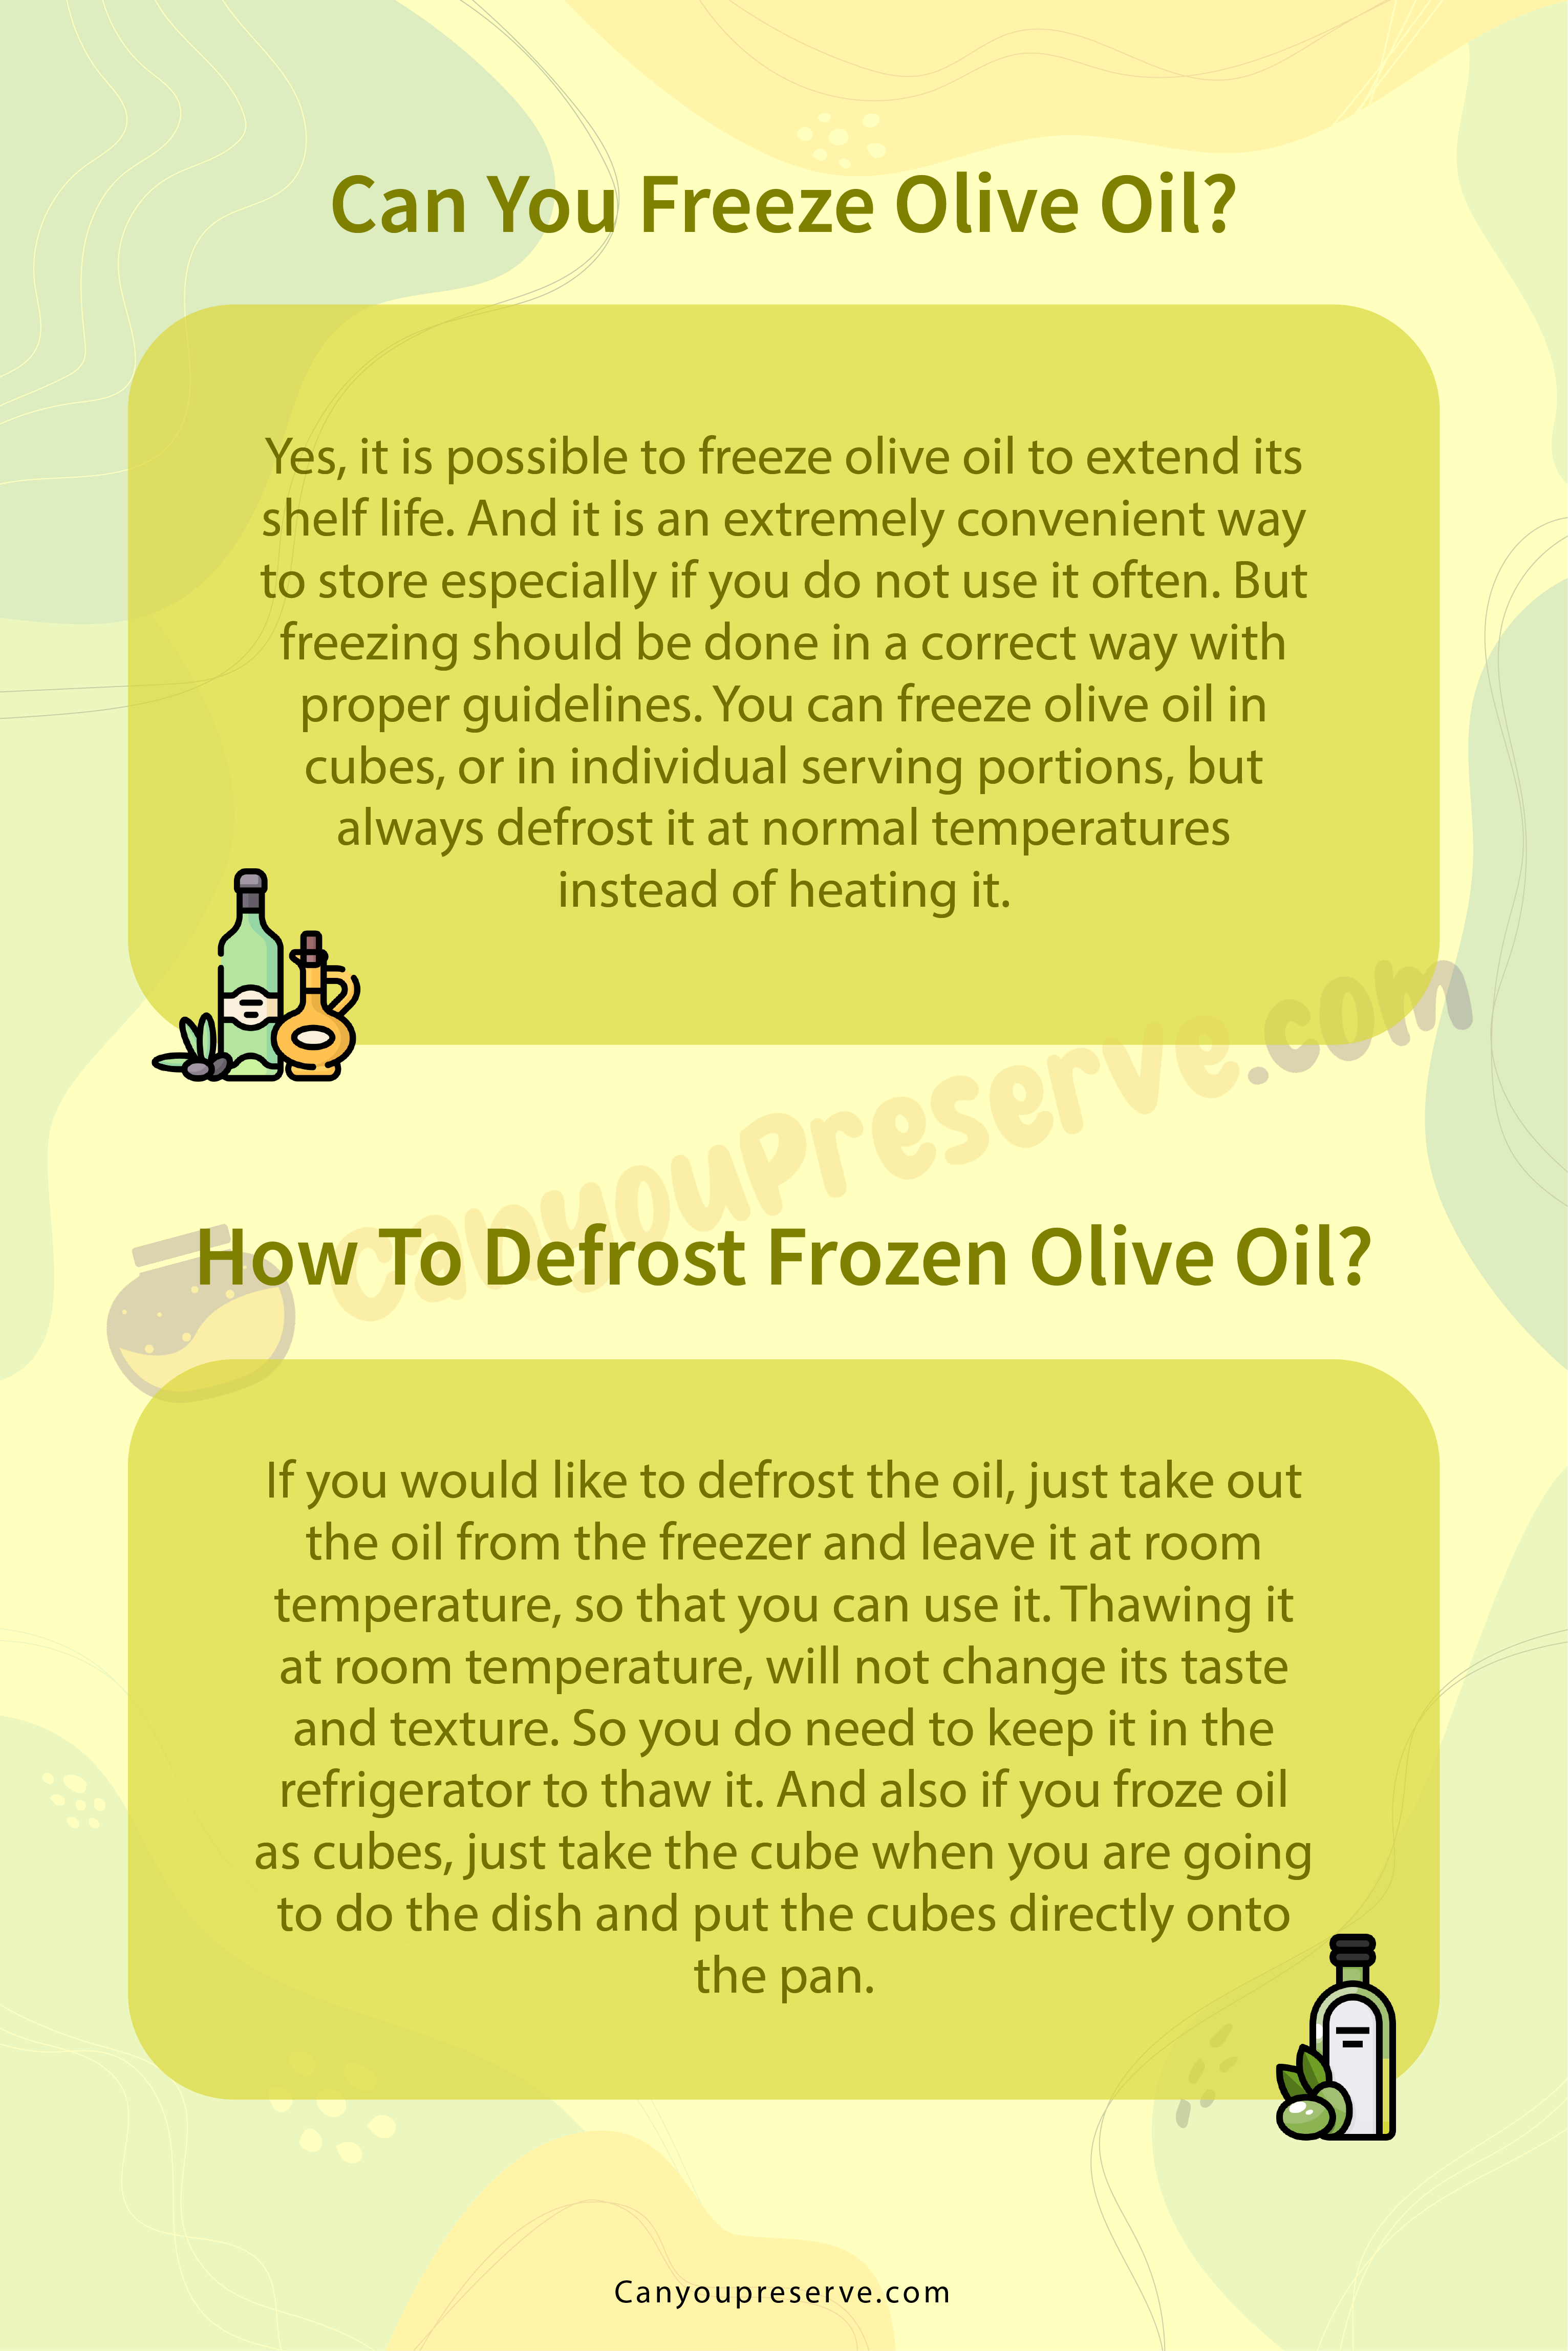 Can You Freeze Olive Oil